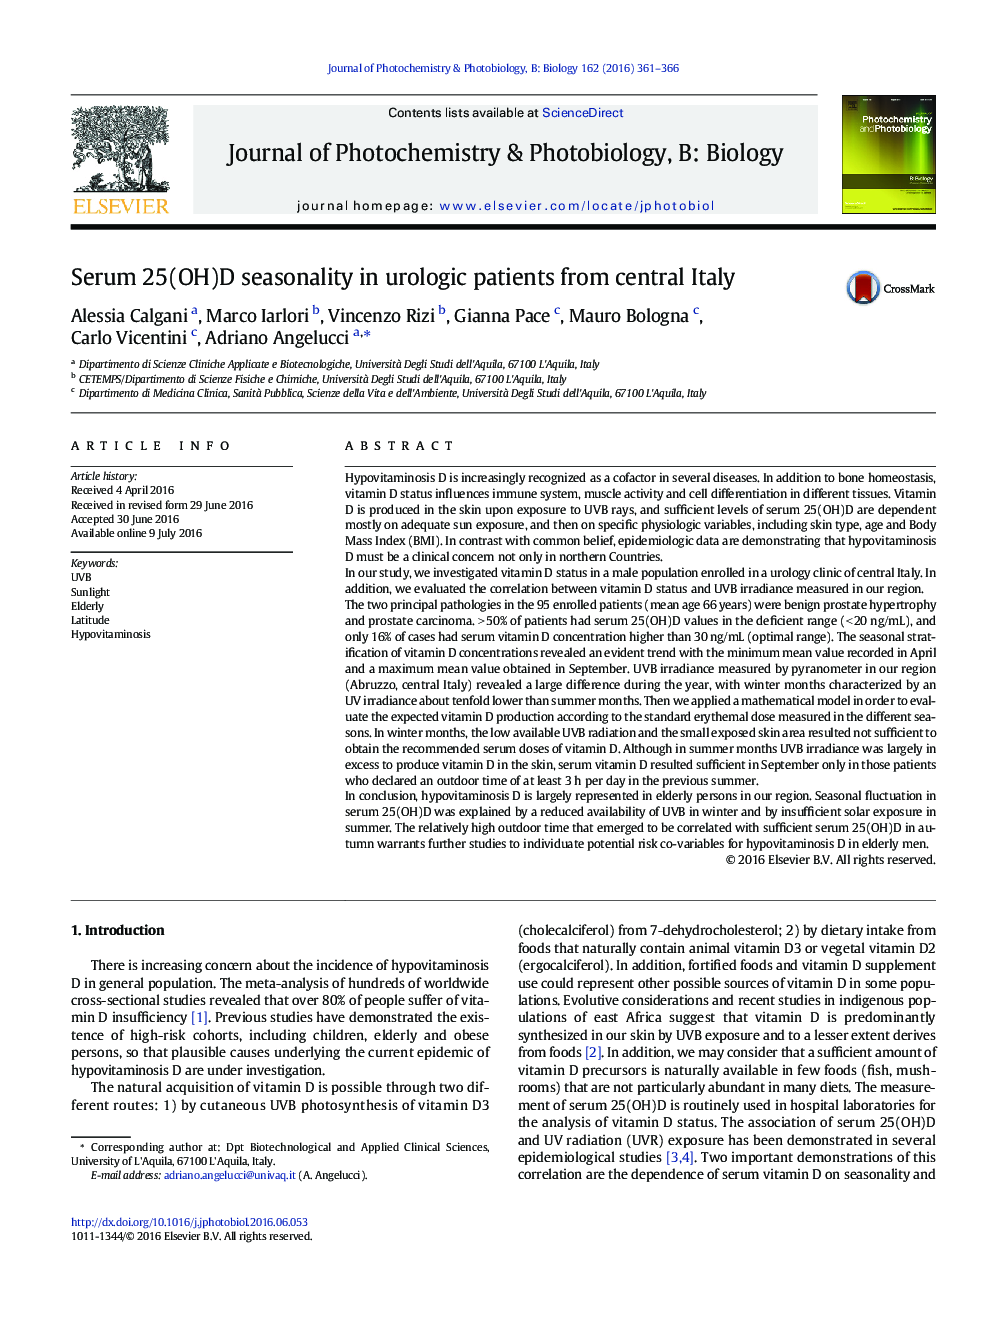 Serum 25(OH)D seasonality in urologic patients from central Italy